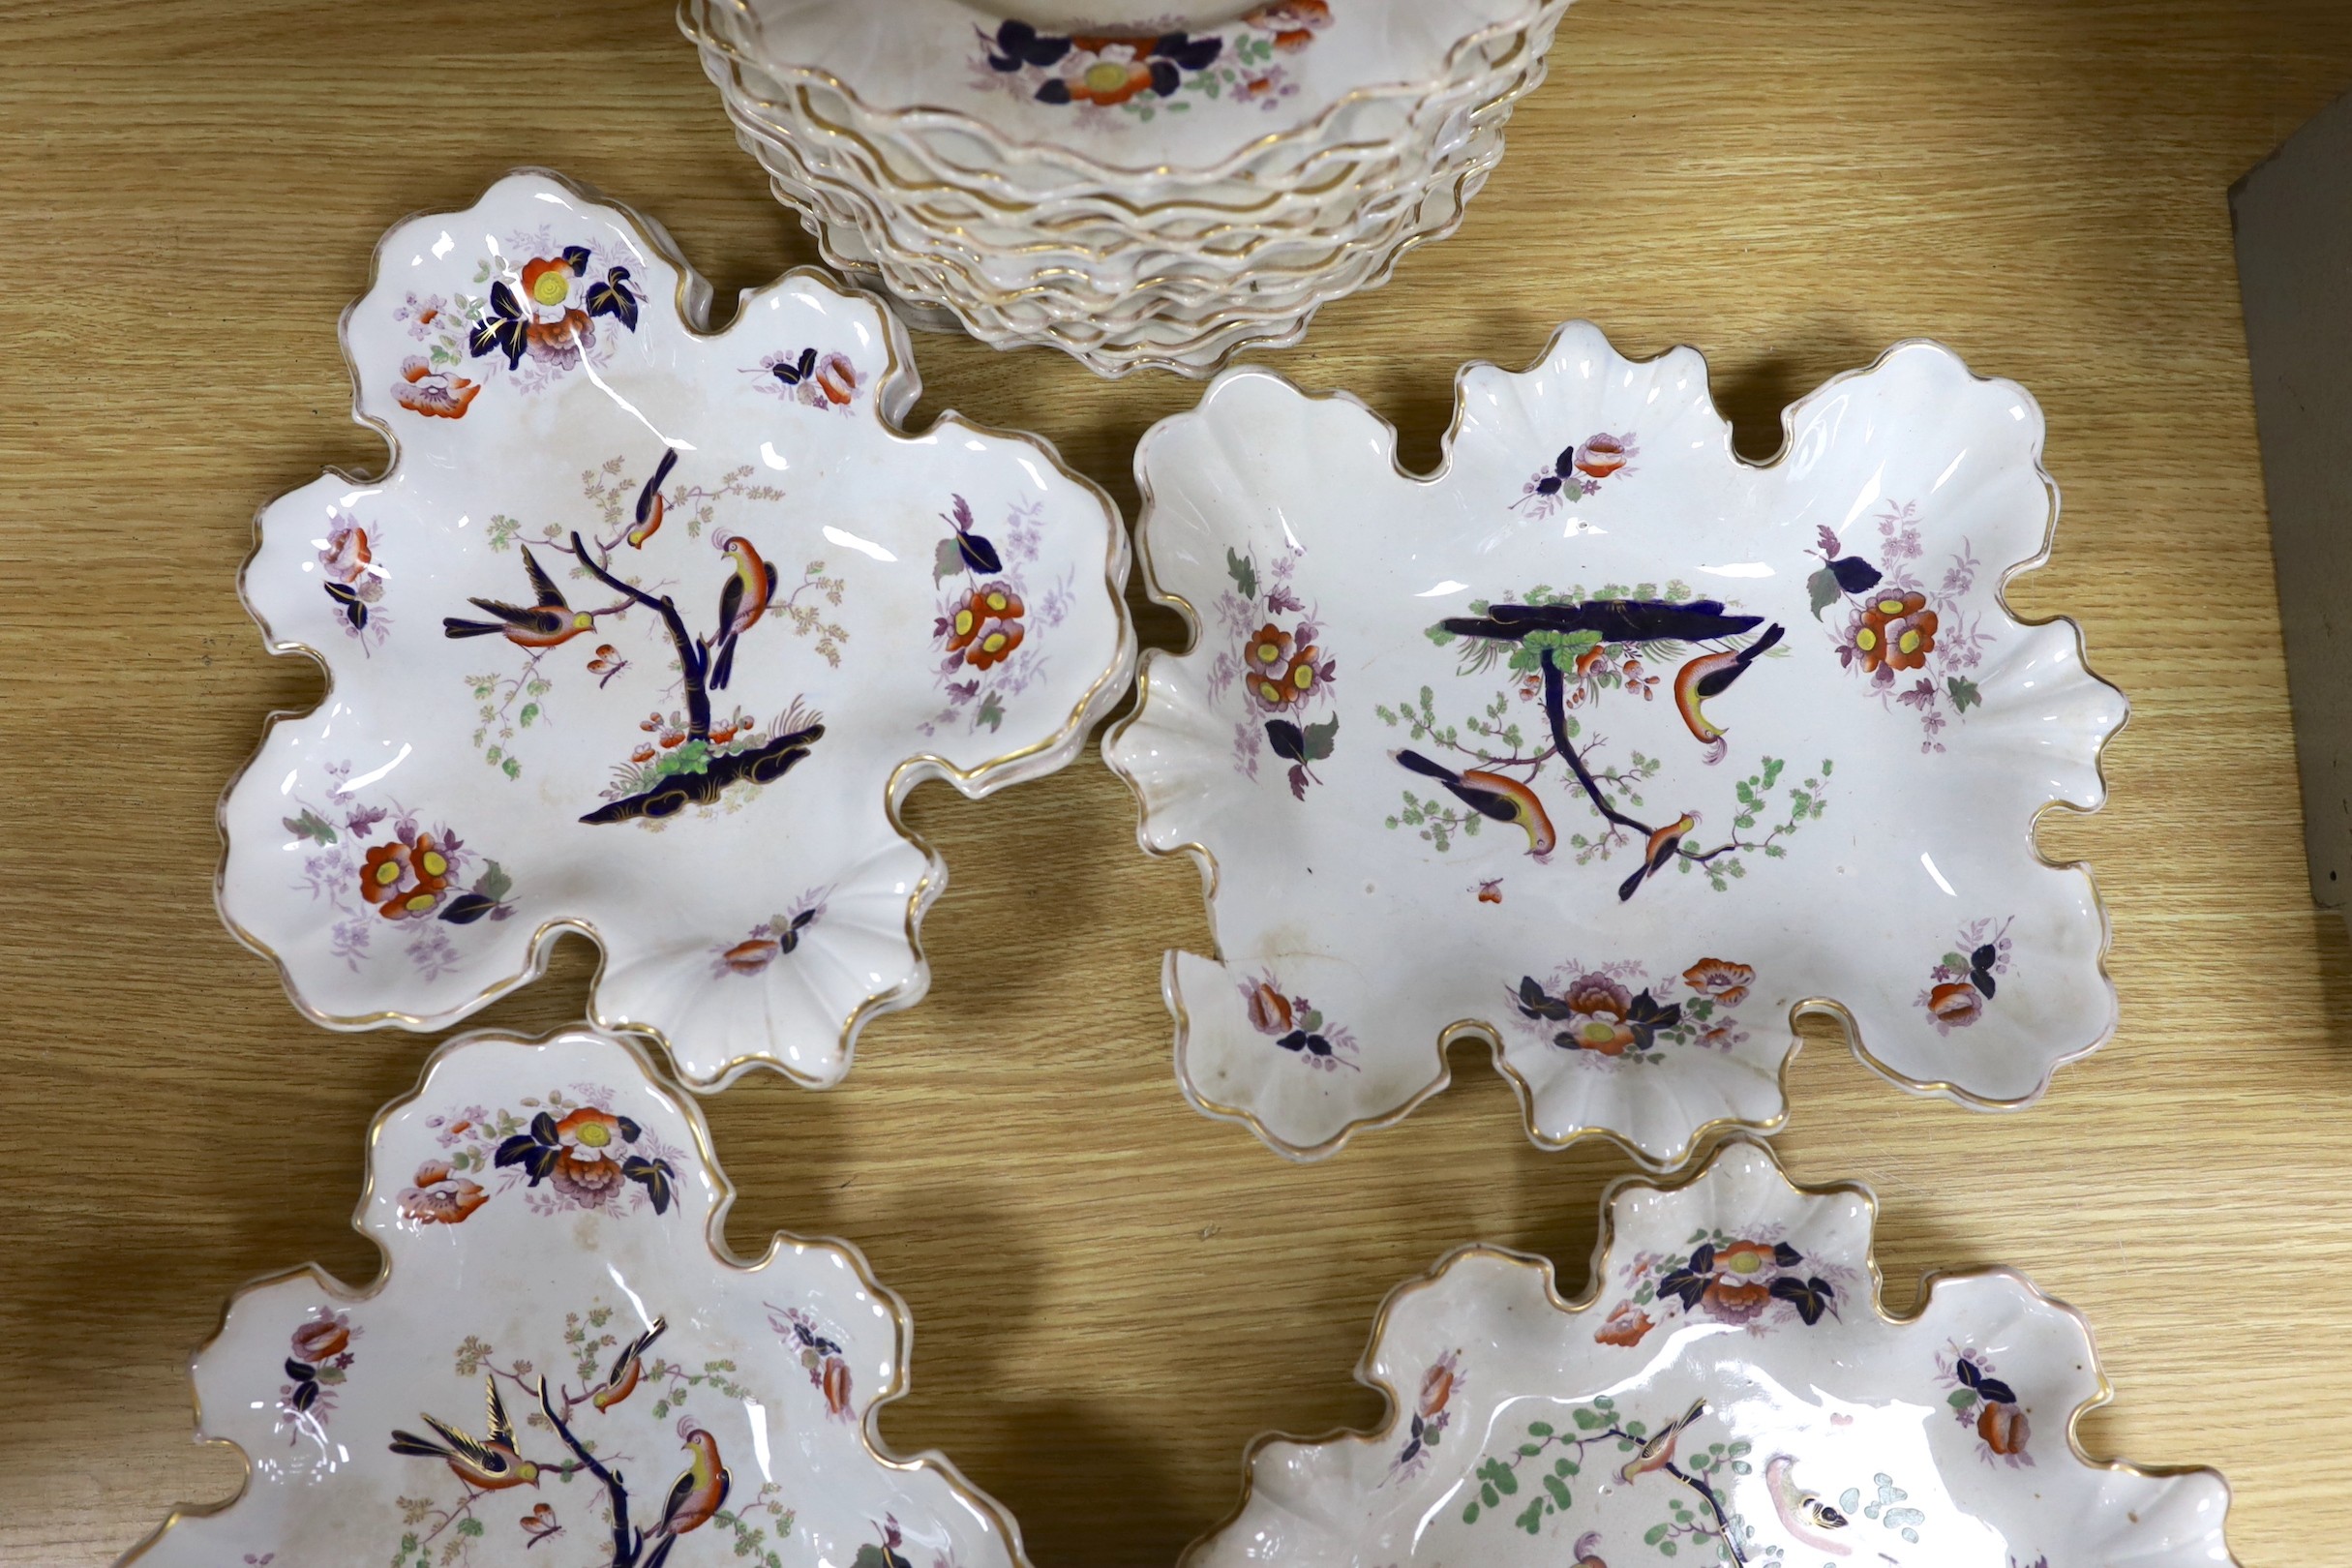 A mid 19th century opaque china dessert service by W. Baker & Co. - Image 3 of 5